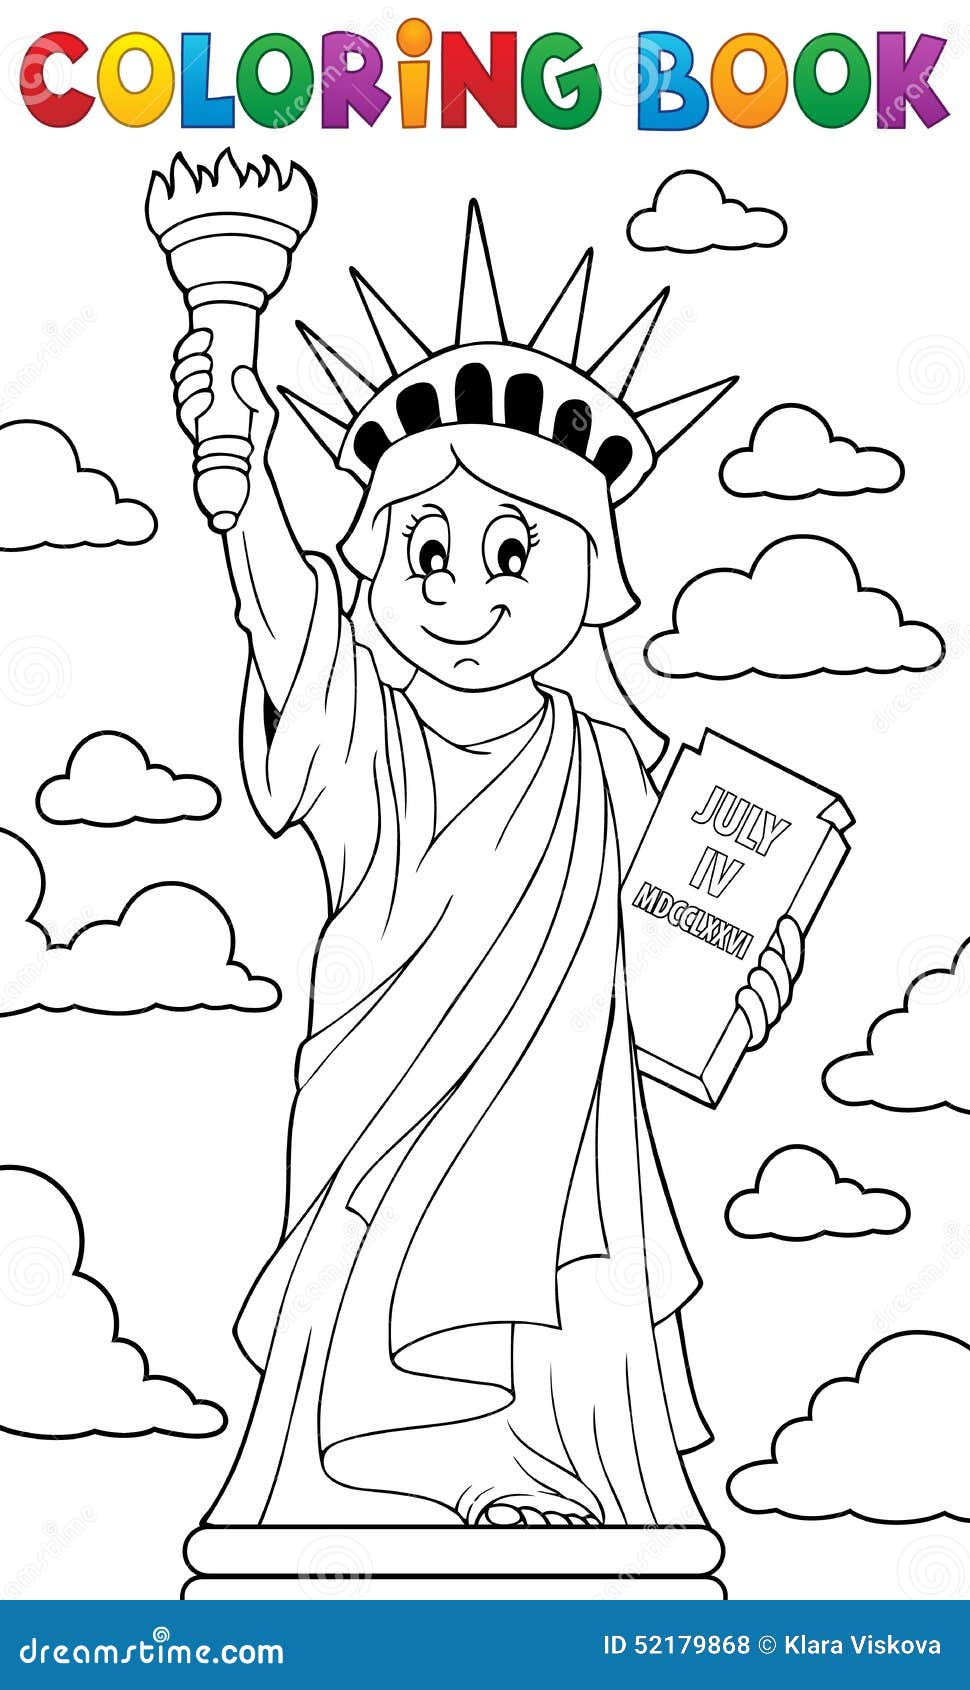 Coloring book Statue of Liberty theme 1